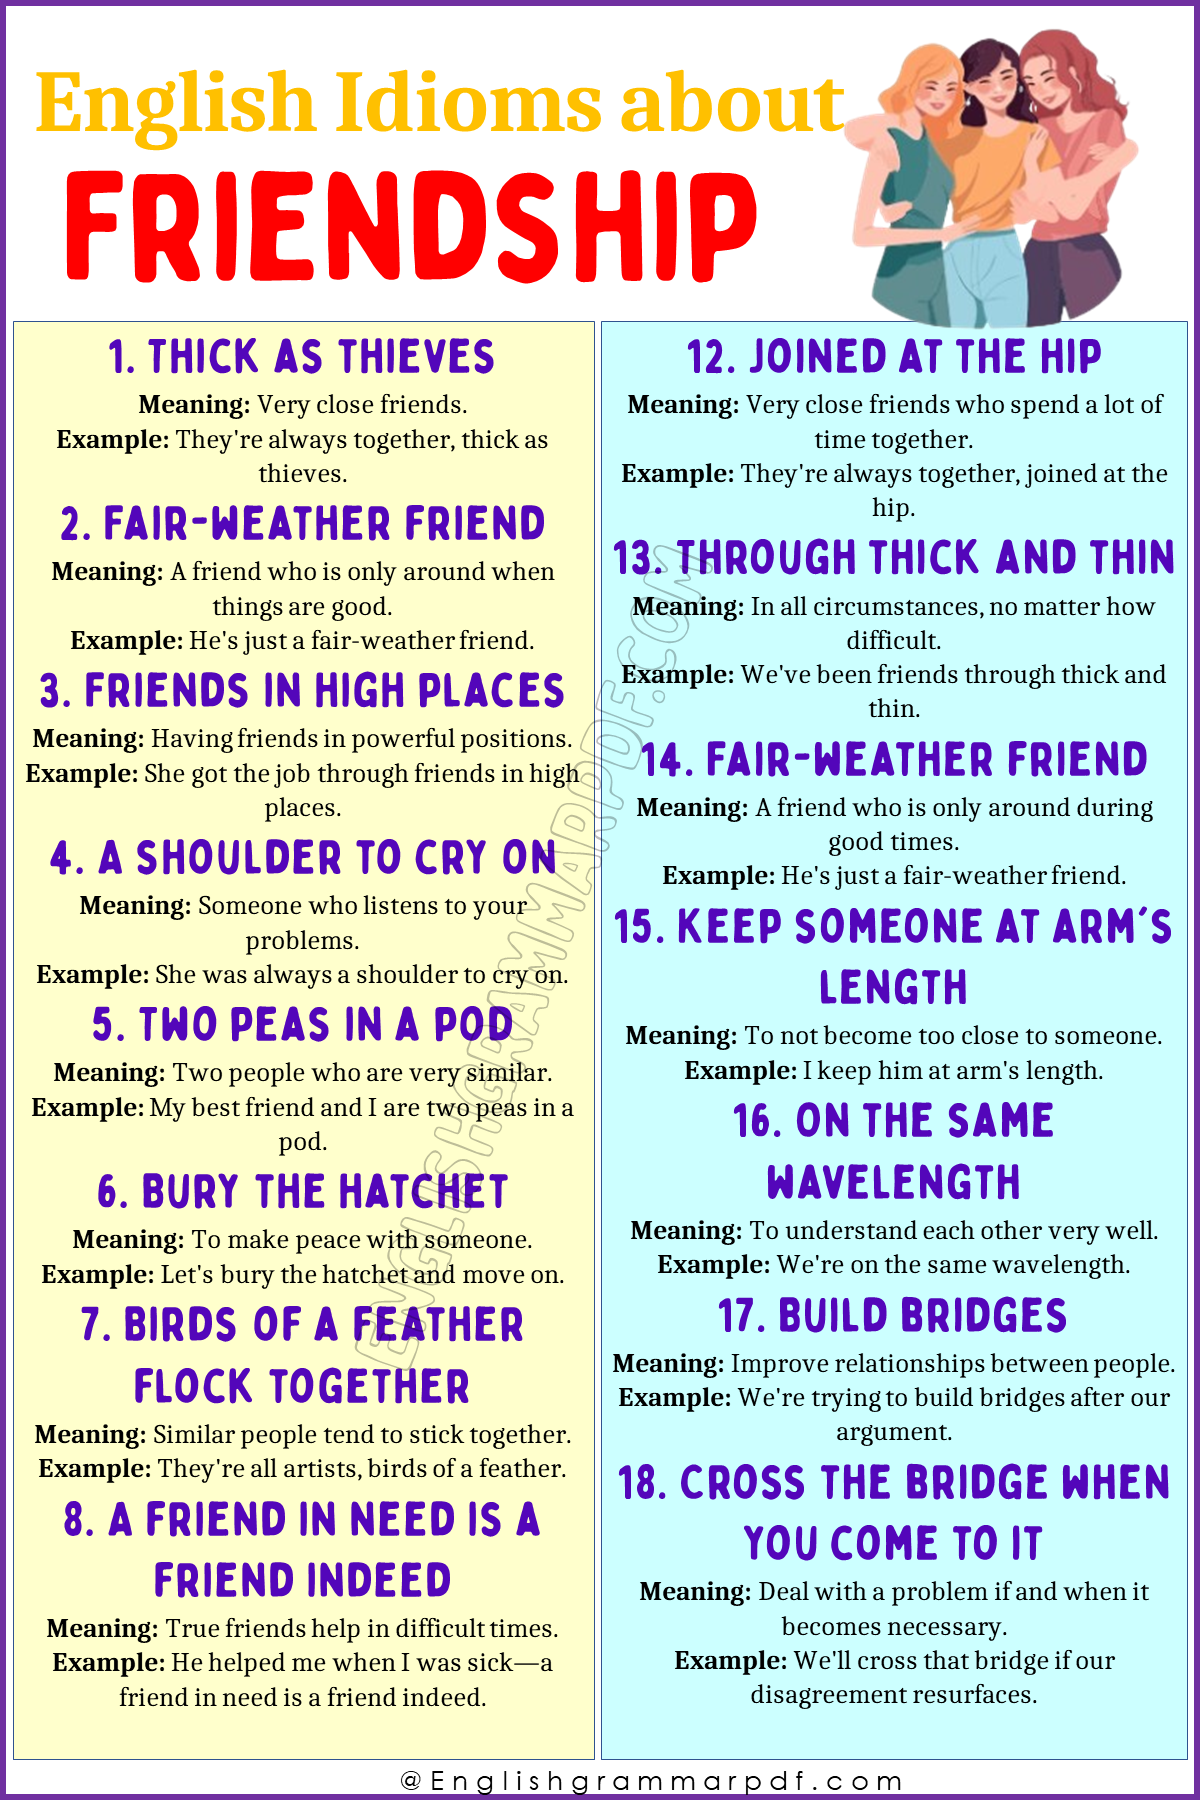 English Idioms About Friendship